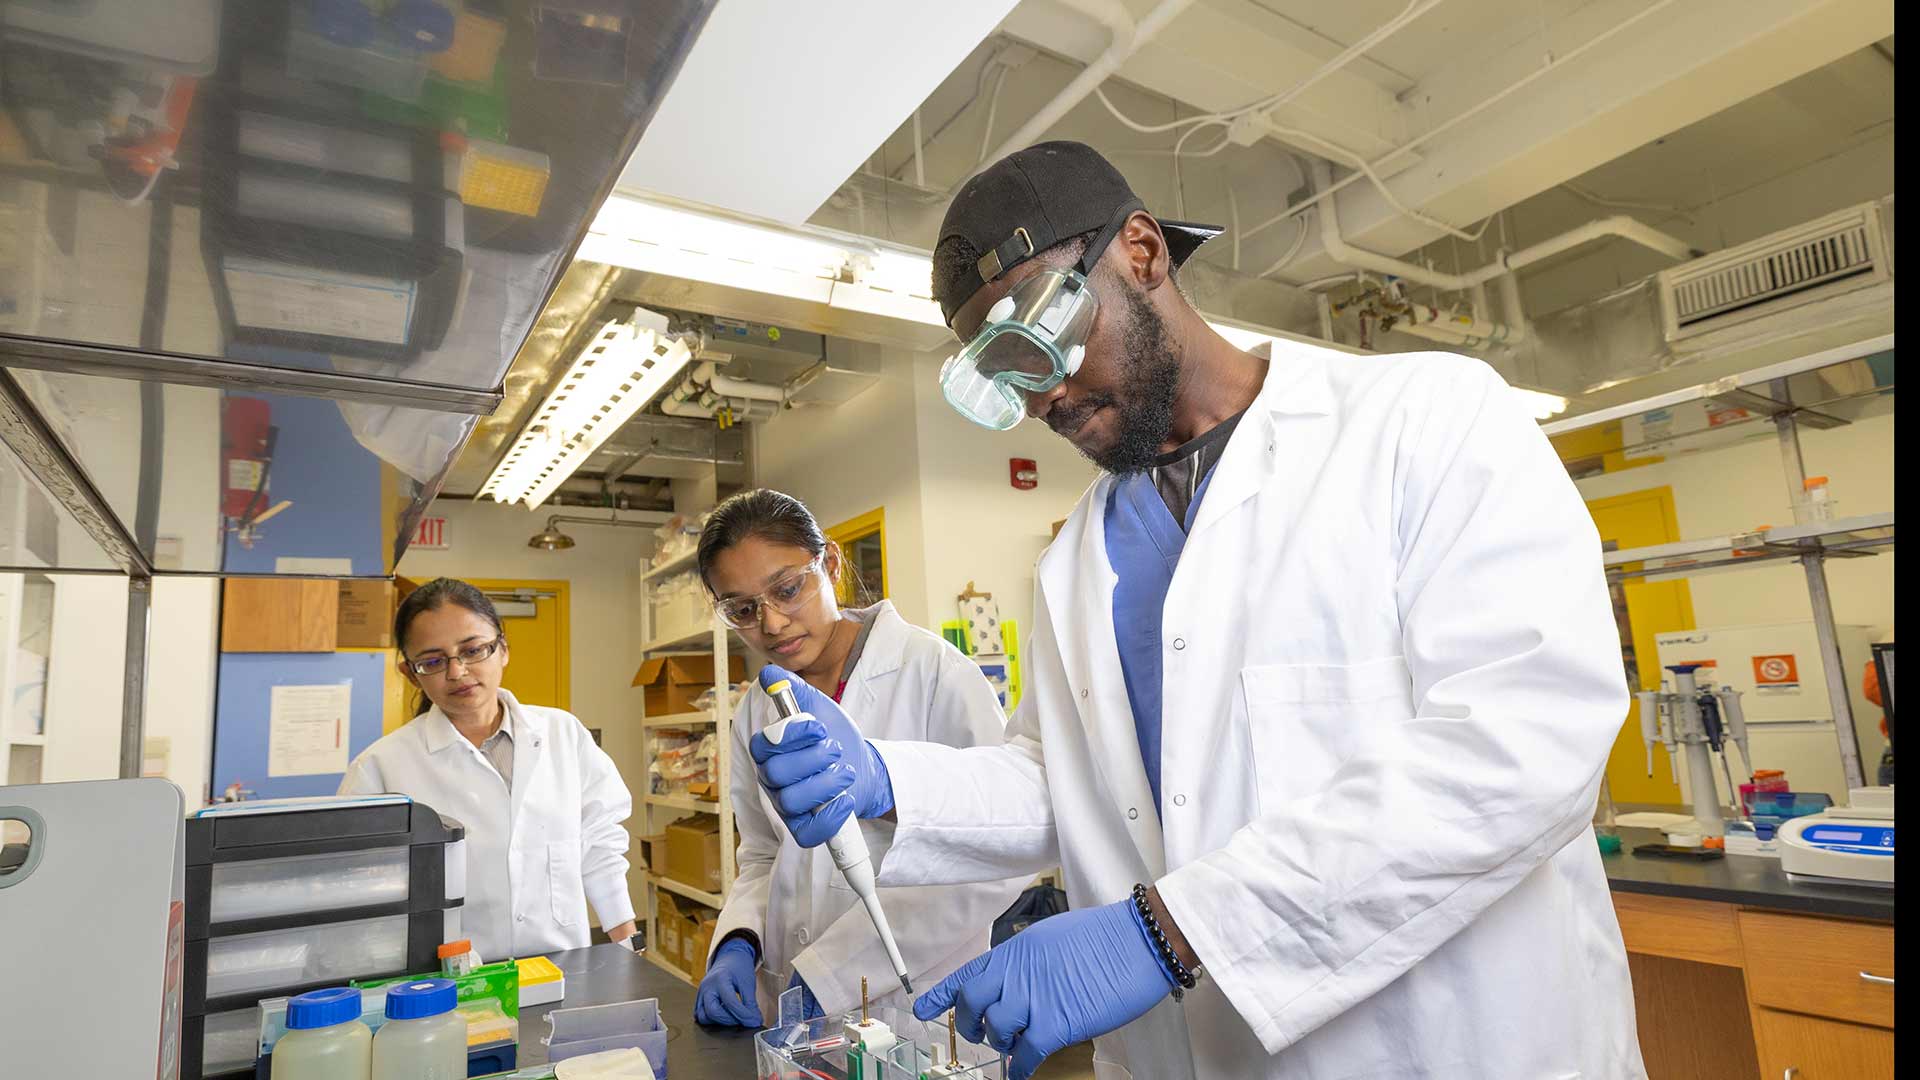 A chemistry graduate student works in a lab by mixing materials with a tool while another student and a professor observe.